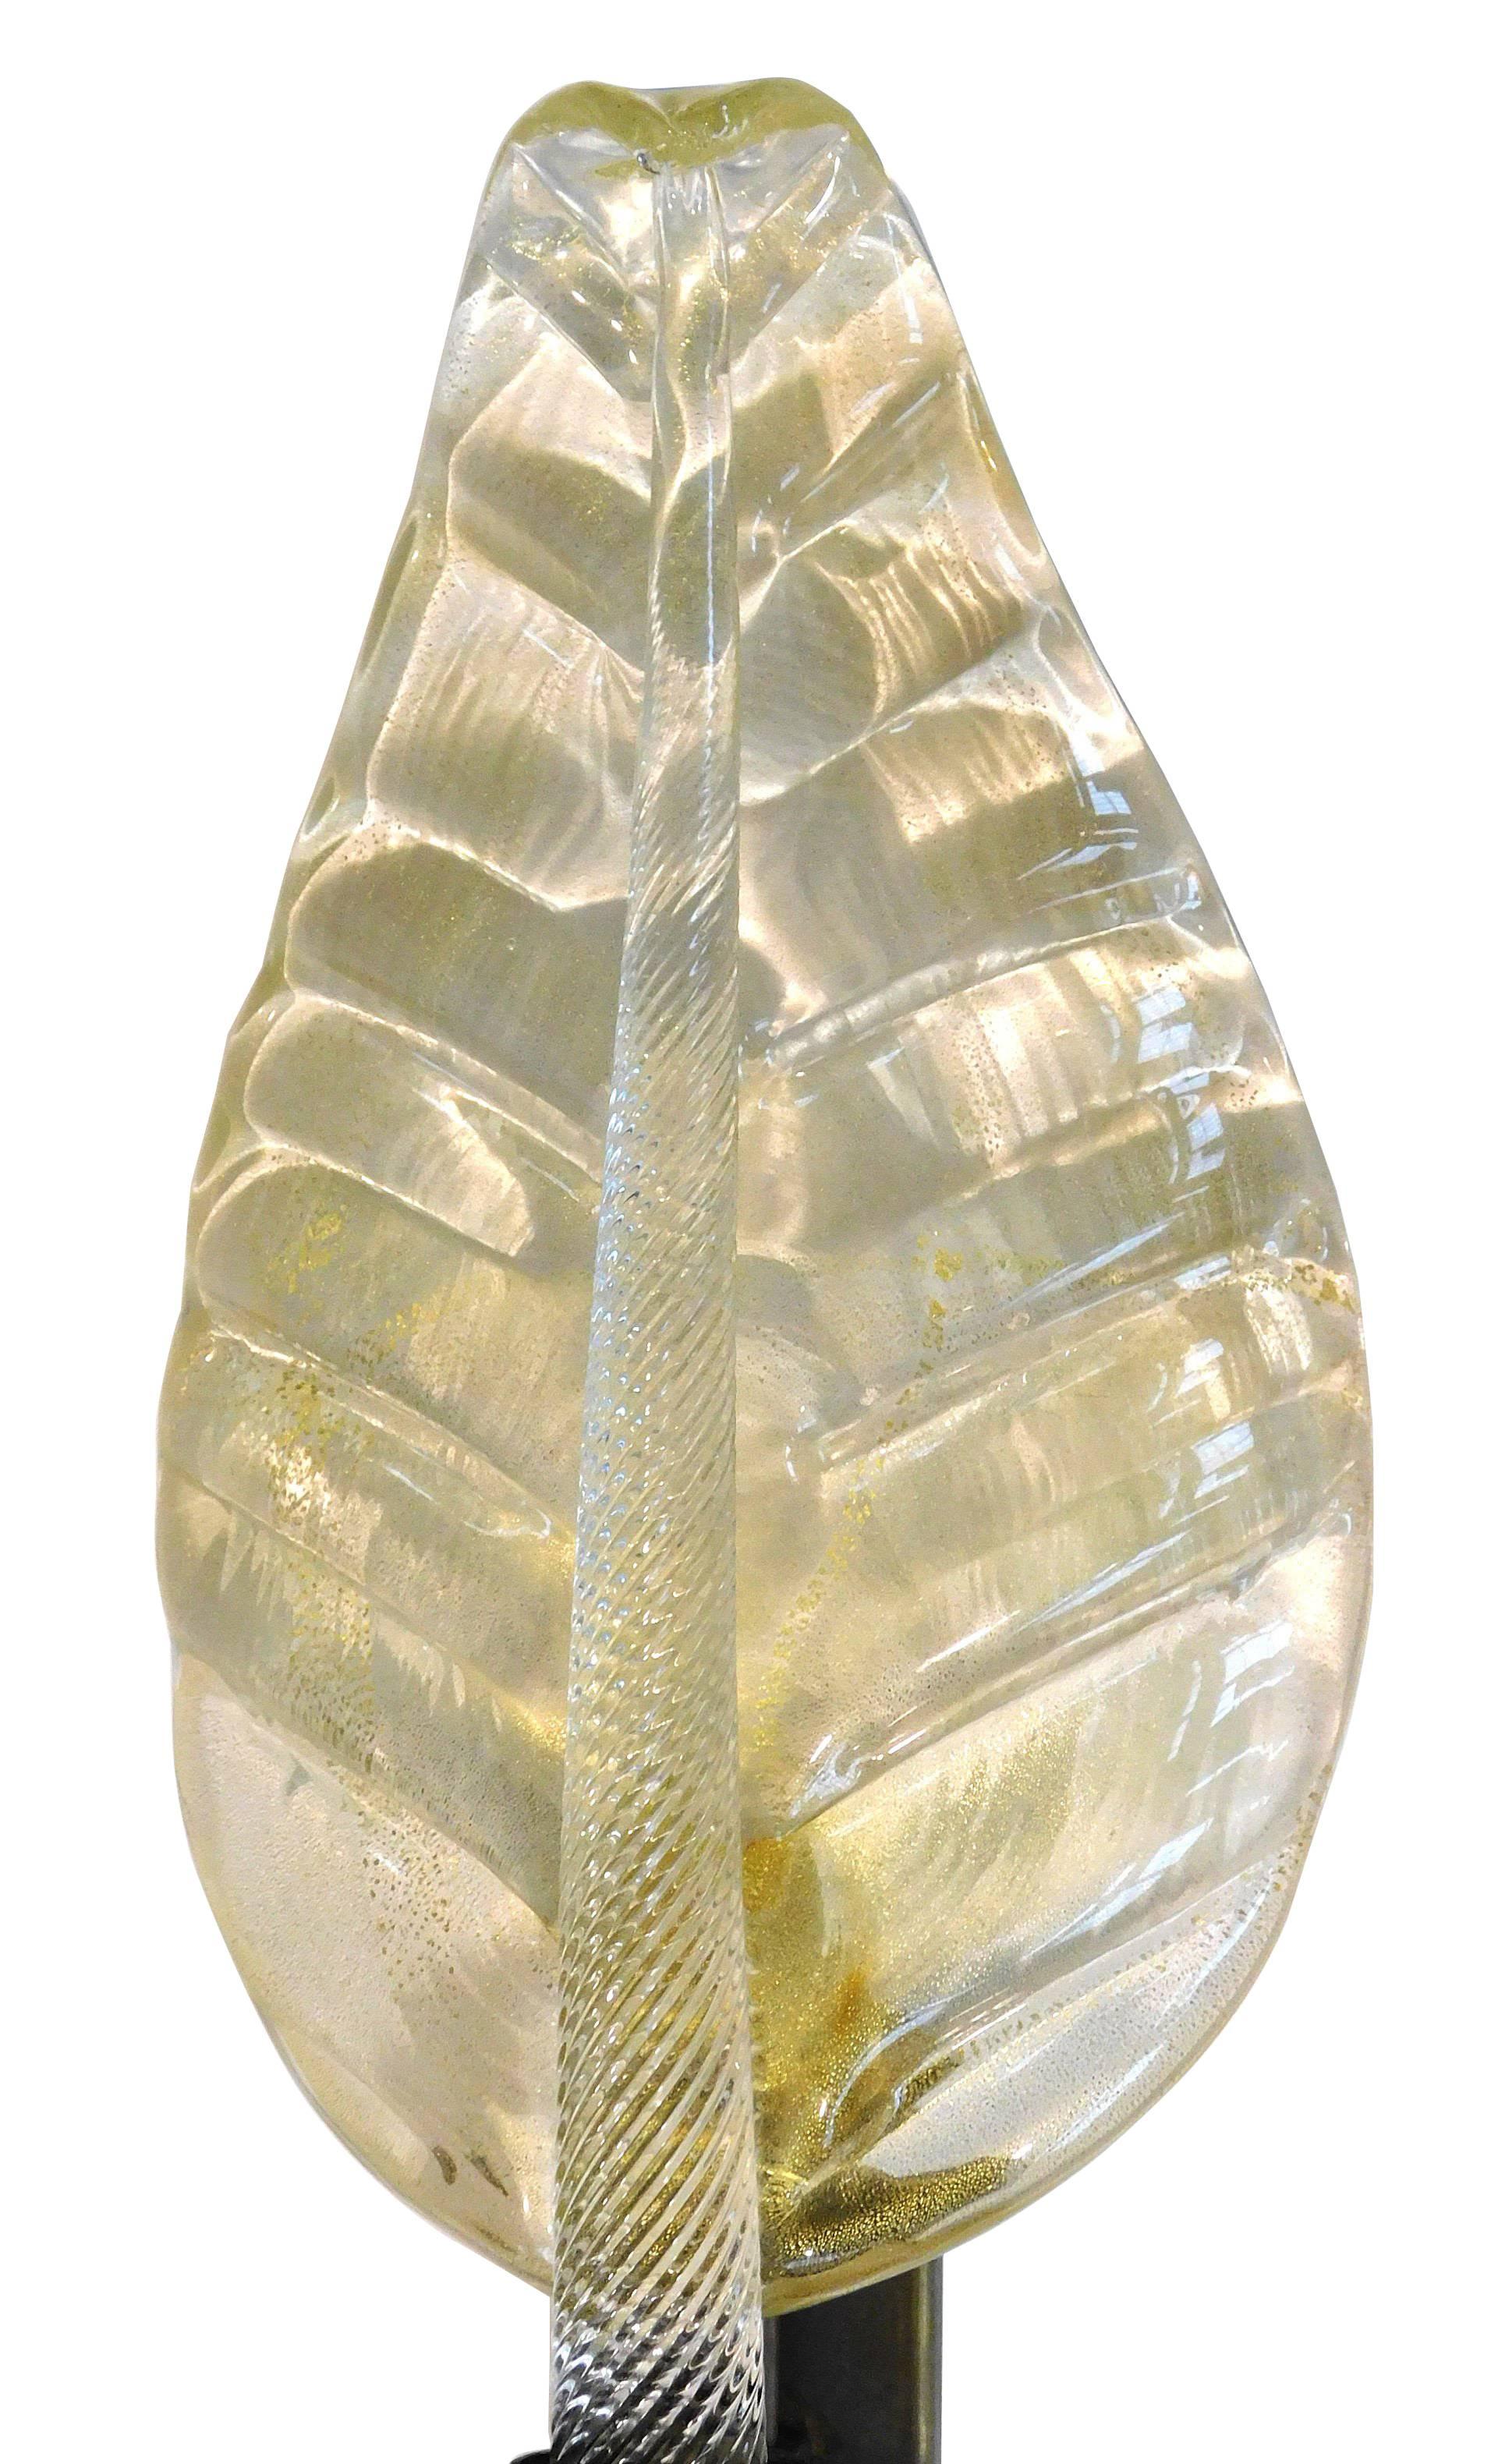 Italian leaf shaped wall light shown in hand blown Murano glass infused with 24-karat gold flecks mounted on bronze frame by Fabio Ltd / Made in Italy
1 light / E14 or E12 type / max 40W each
Measures: Height 20 inches / width 9 inches / depth 5